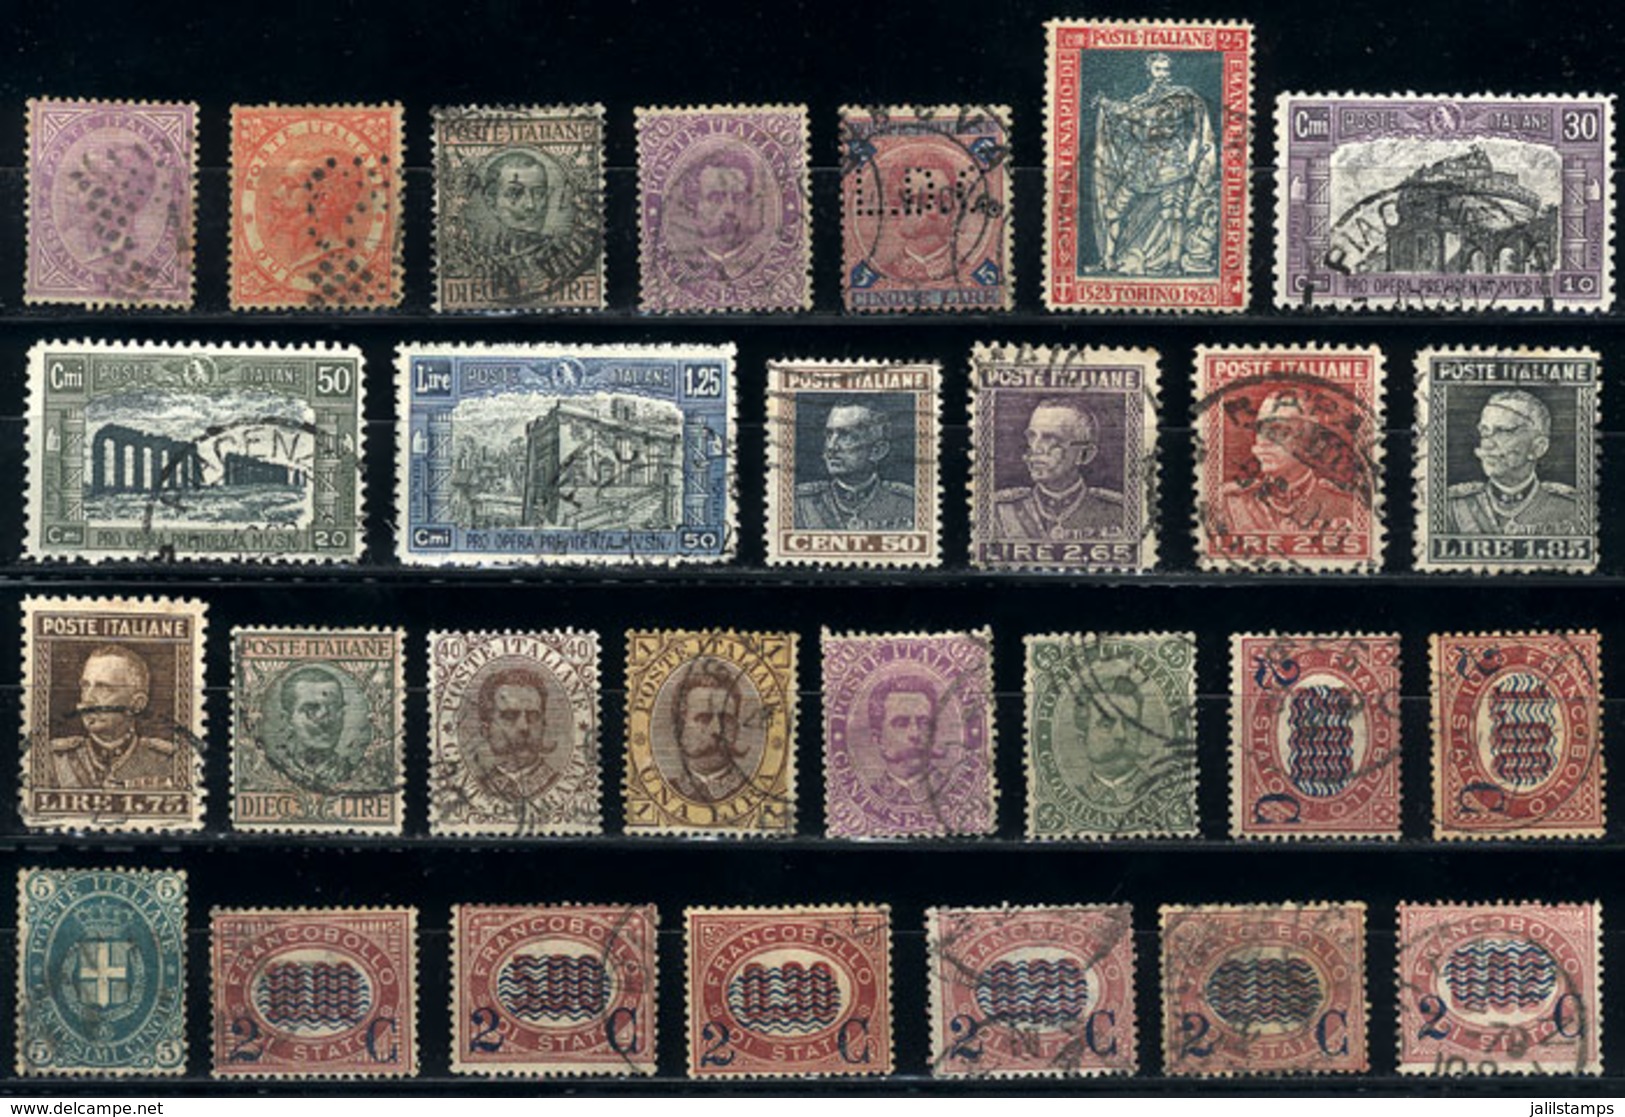 888 ITALY: Interesting Lot Of Old Stamps, Used, Most Of Fine To VF Quality (2 Or 3 With - Ohne Zuordnung